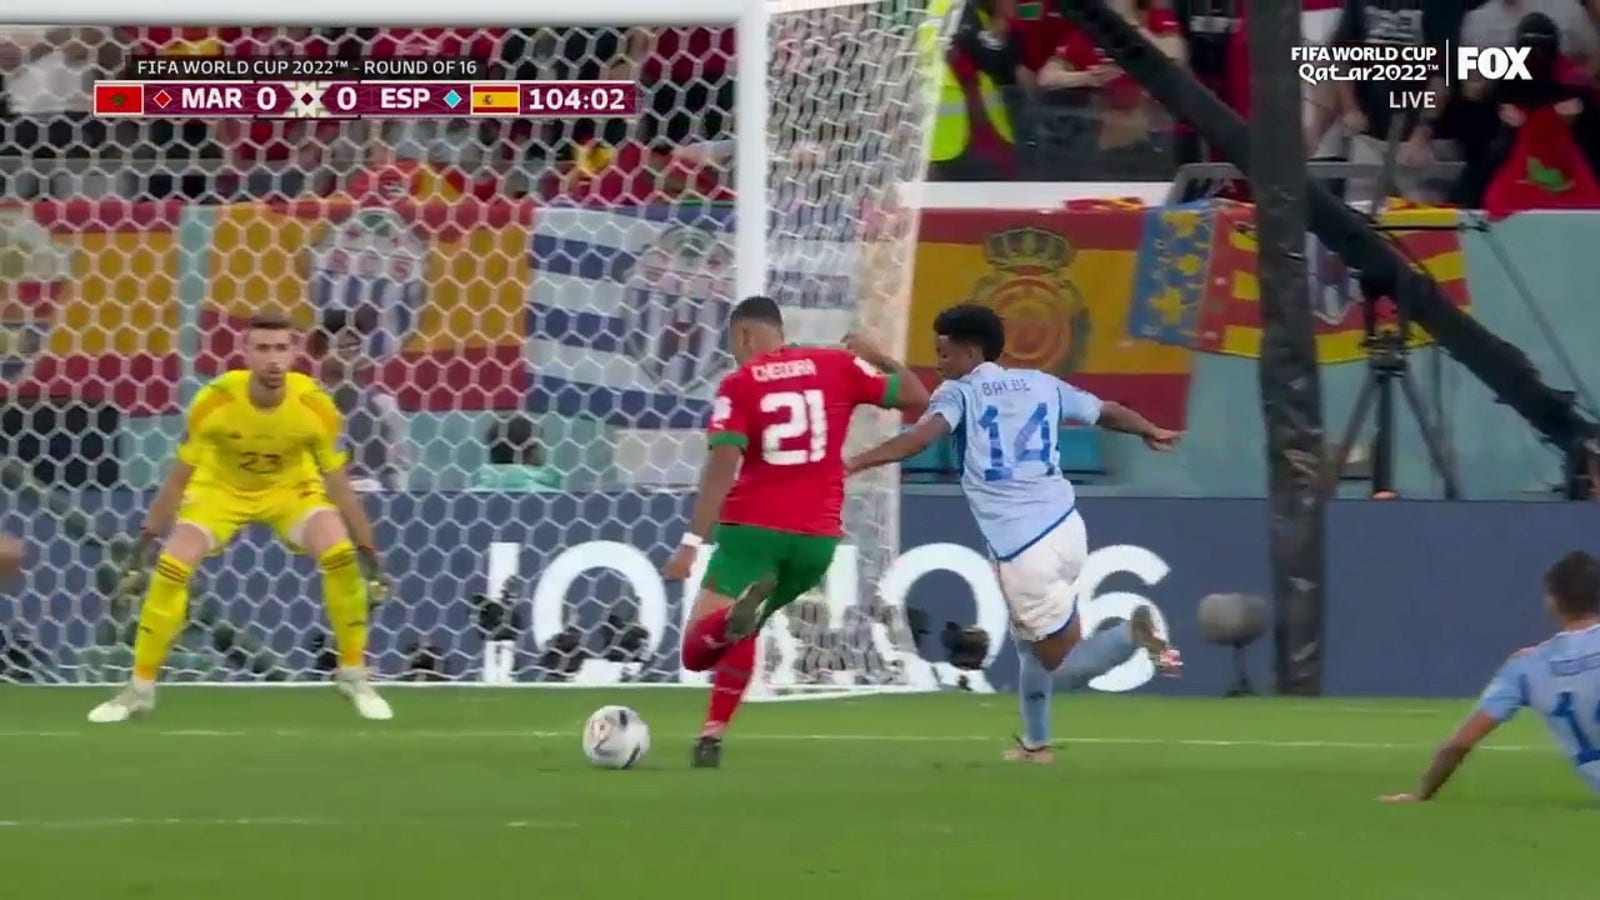 Walid Cheddira's shot for Morocco saved by Spain's goalkeeper Unai Simon